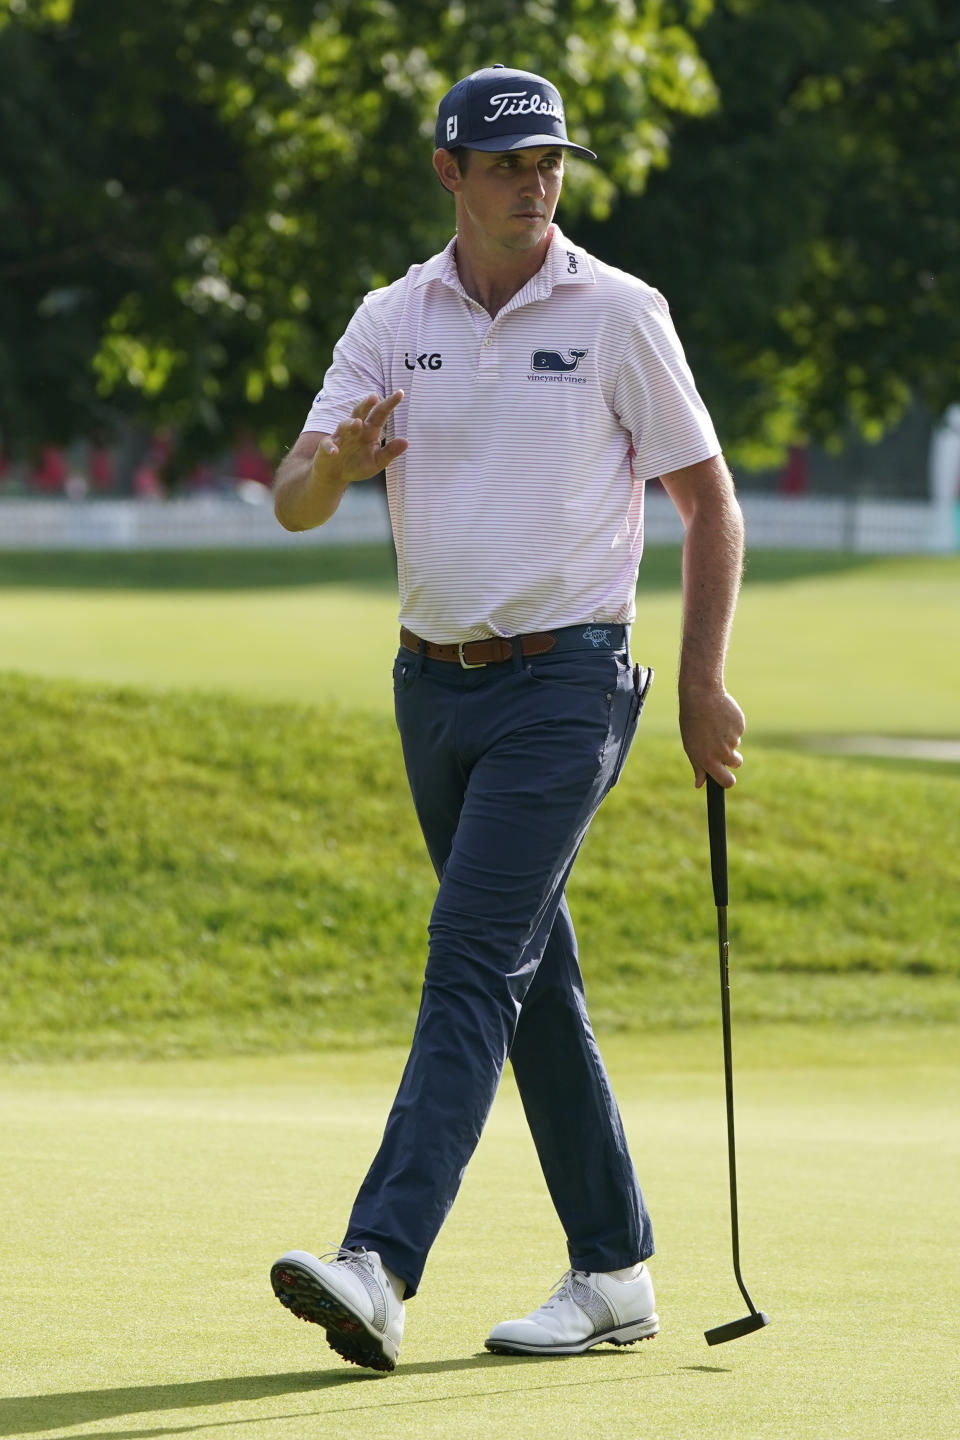 J.T. Poston reacts after finishing his round on the ninth hole during the first round of the Travelers Championship golf tournament at TPC River Highlands, Thursday, June 23, 2022, in Cromwell, Conn. (AP Photo/Seth Wenig)